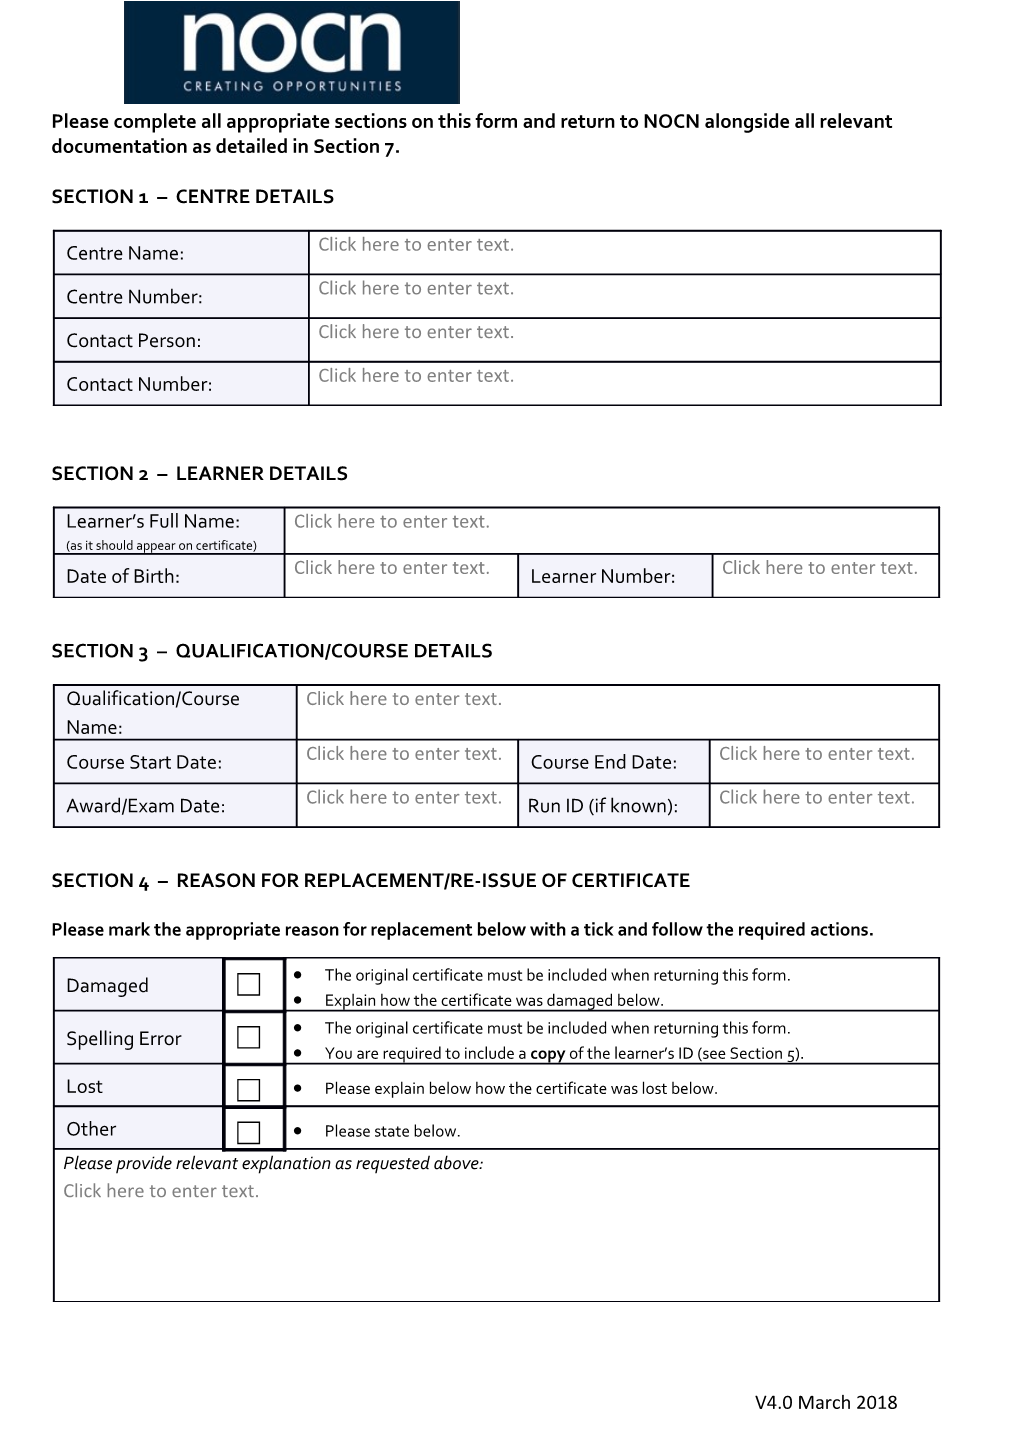 Please Complete All Appropriate Sections on This Form and Return to NOCN Alongside All